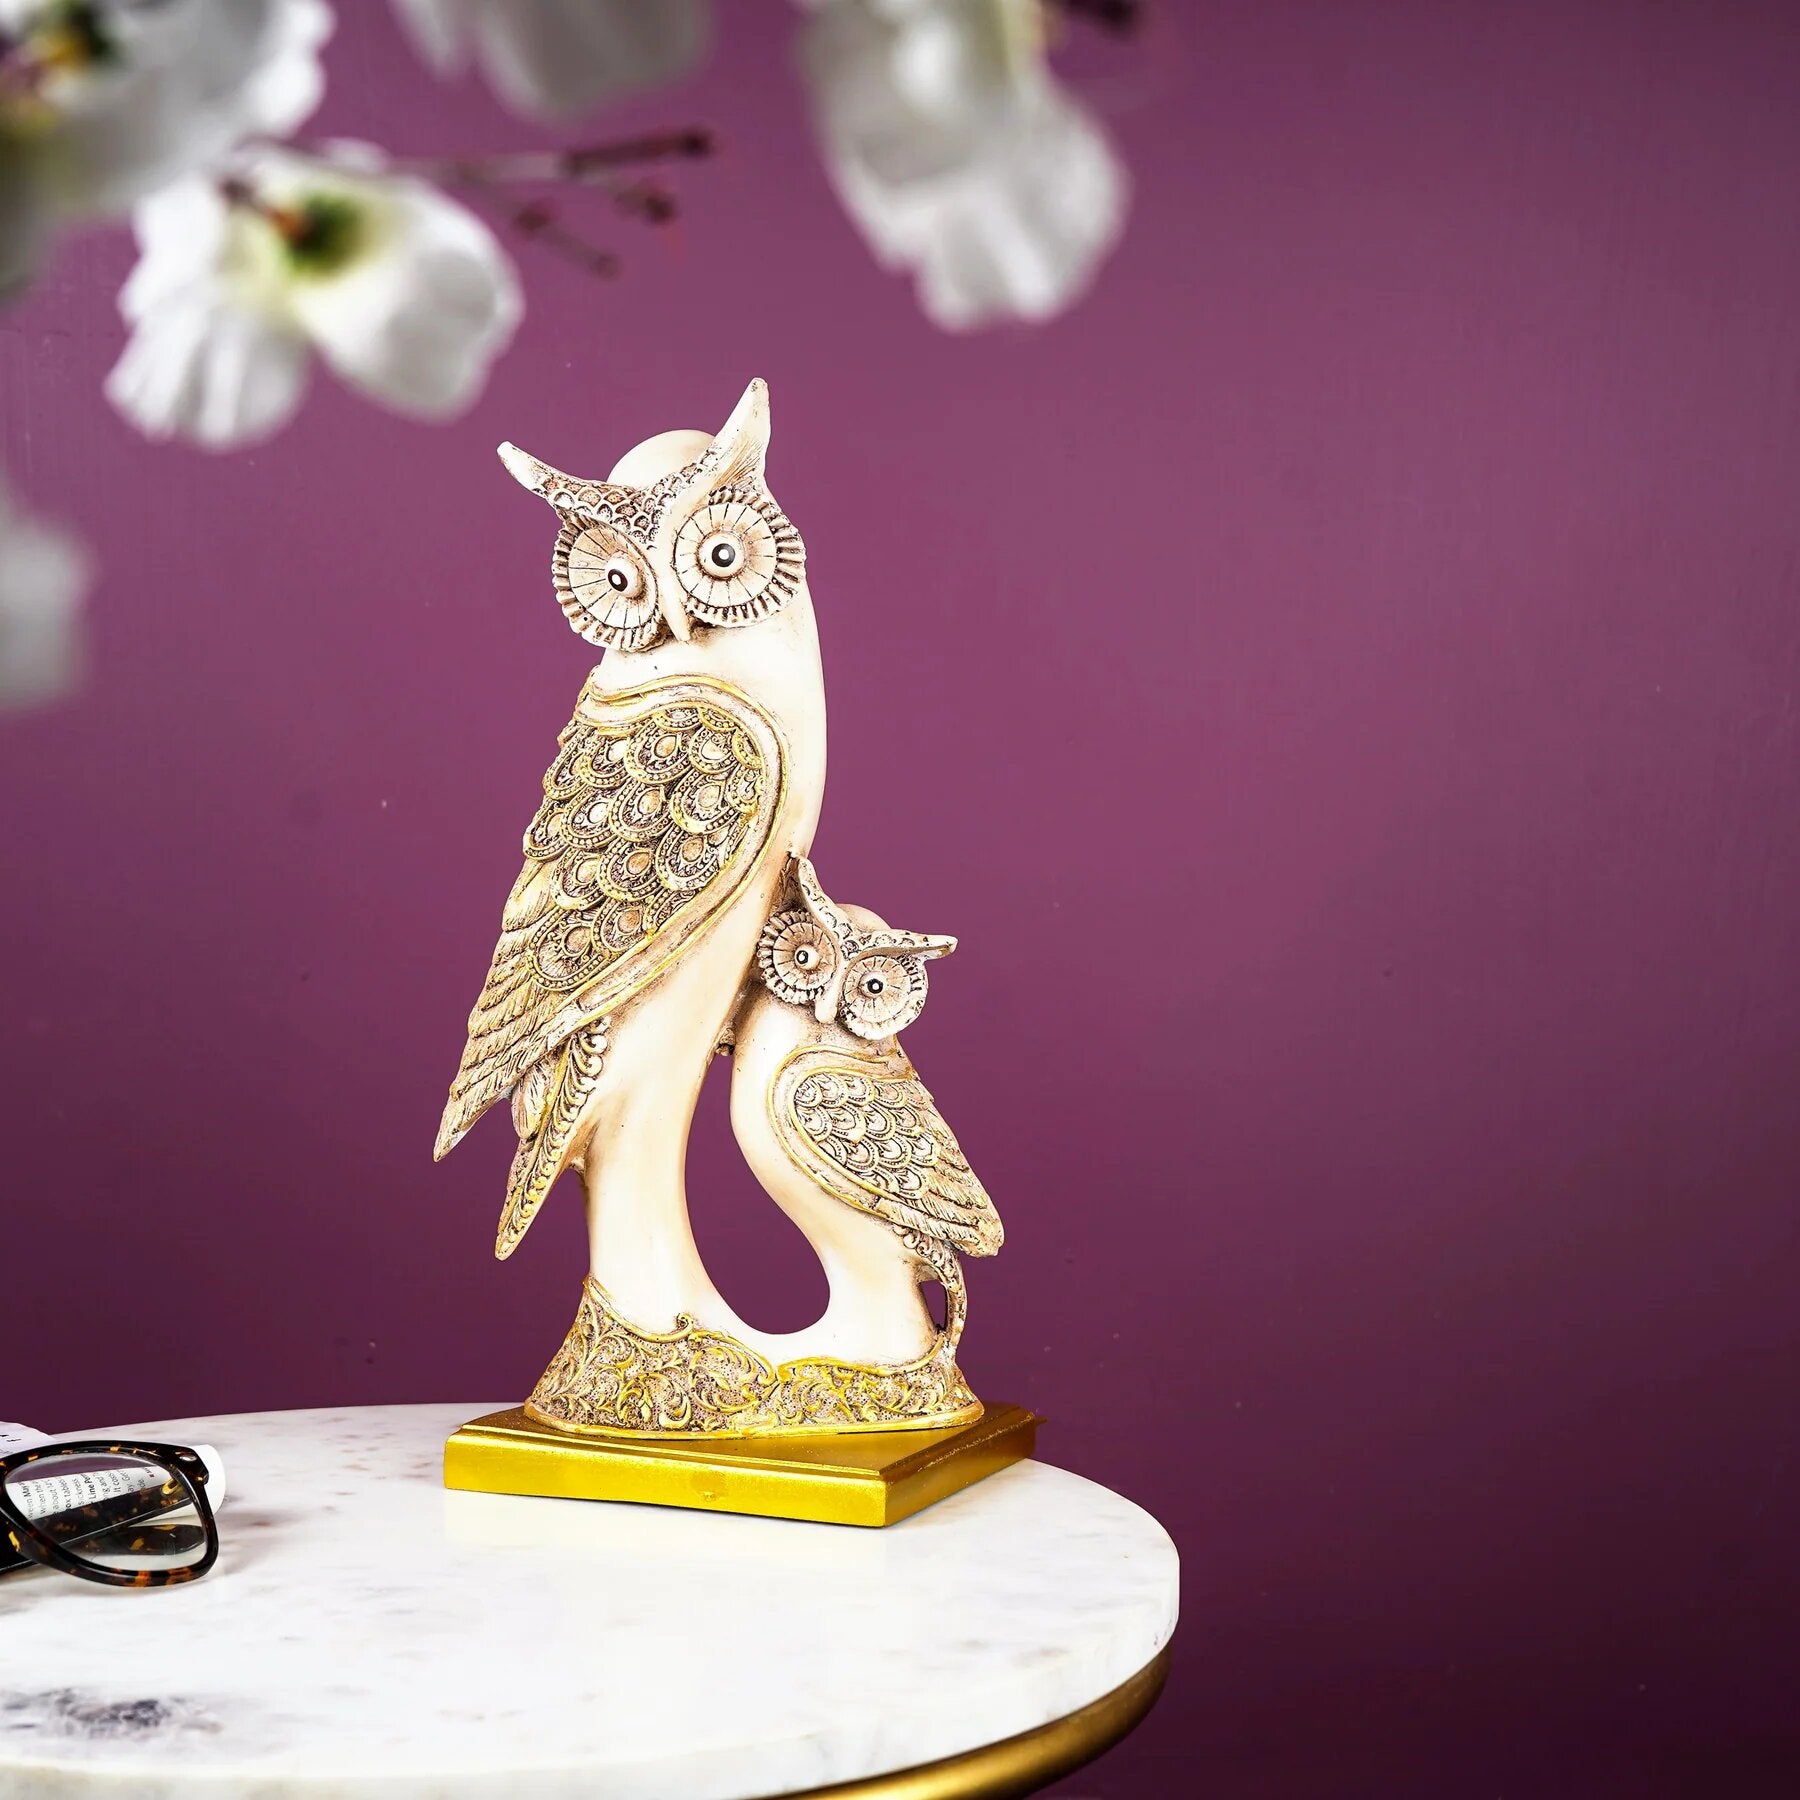 Artistic Gold Winged Bright Owls